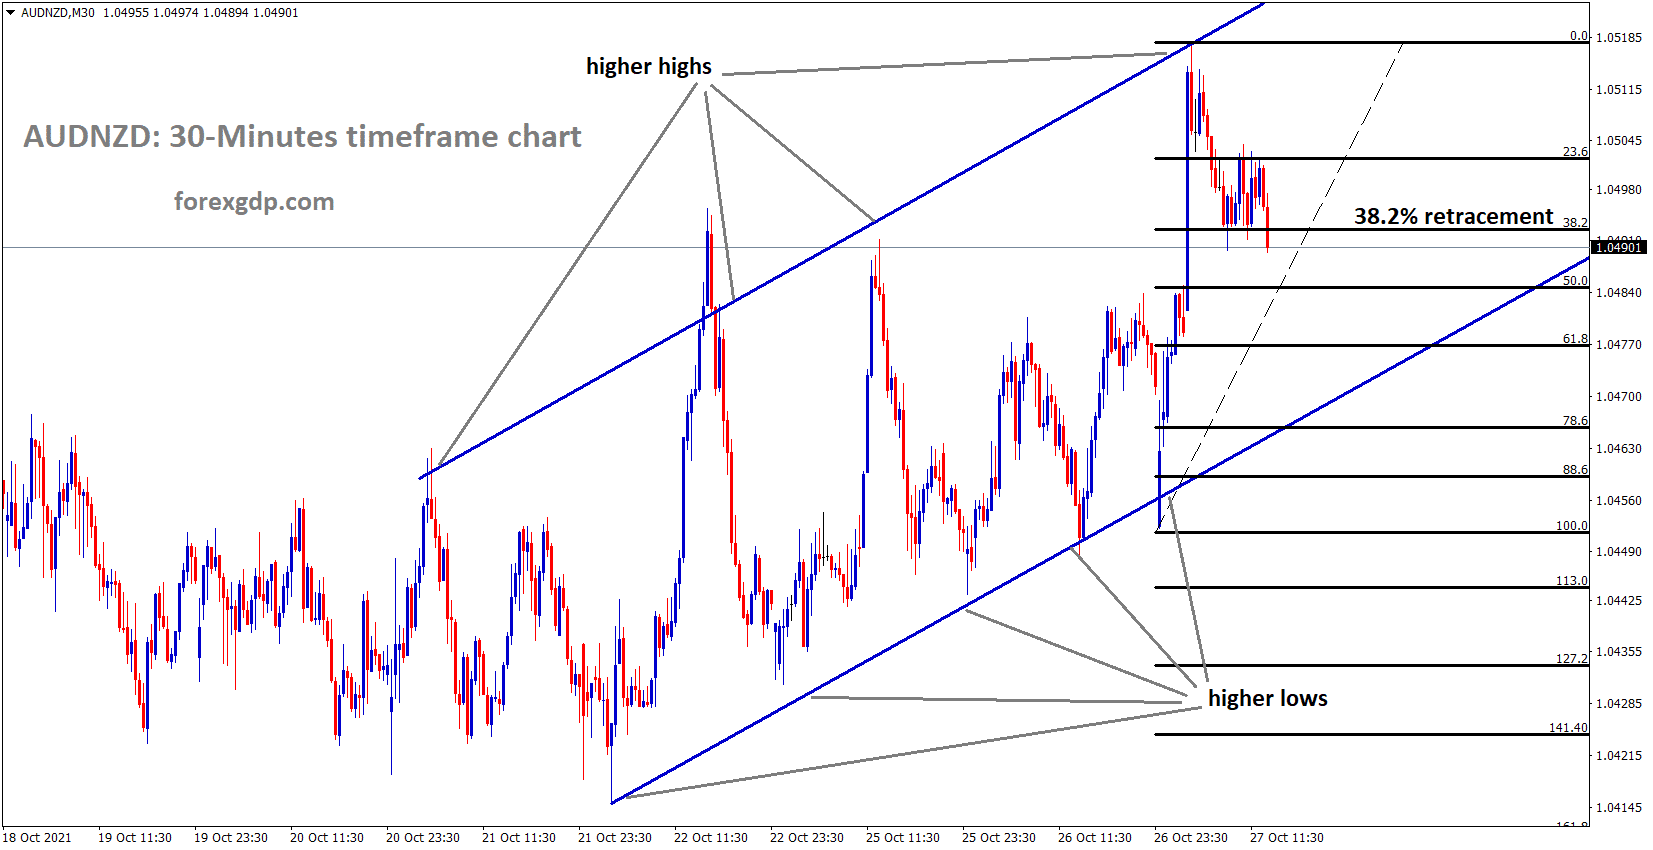 AUDNZD is Moving in an Ascending channel and market standing at the higher low area of 38.2 retracement level